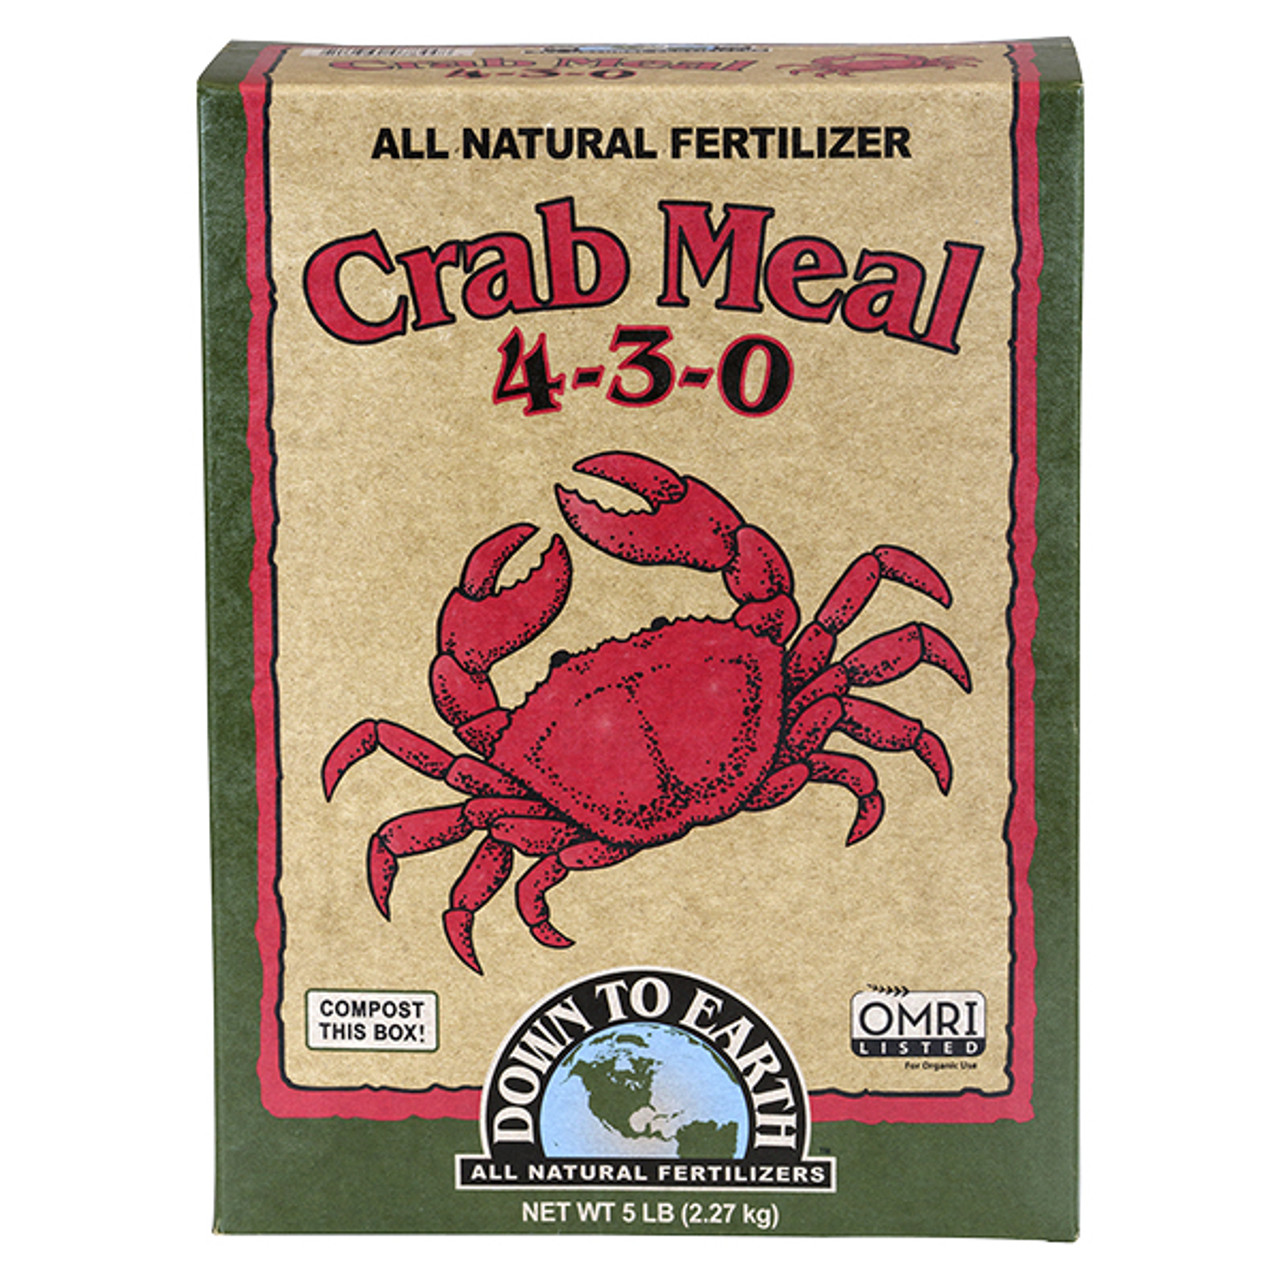 Down to Earth Crab Meal (4-3-0)